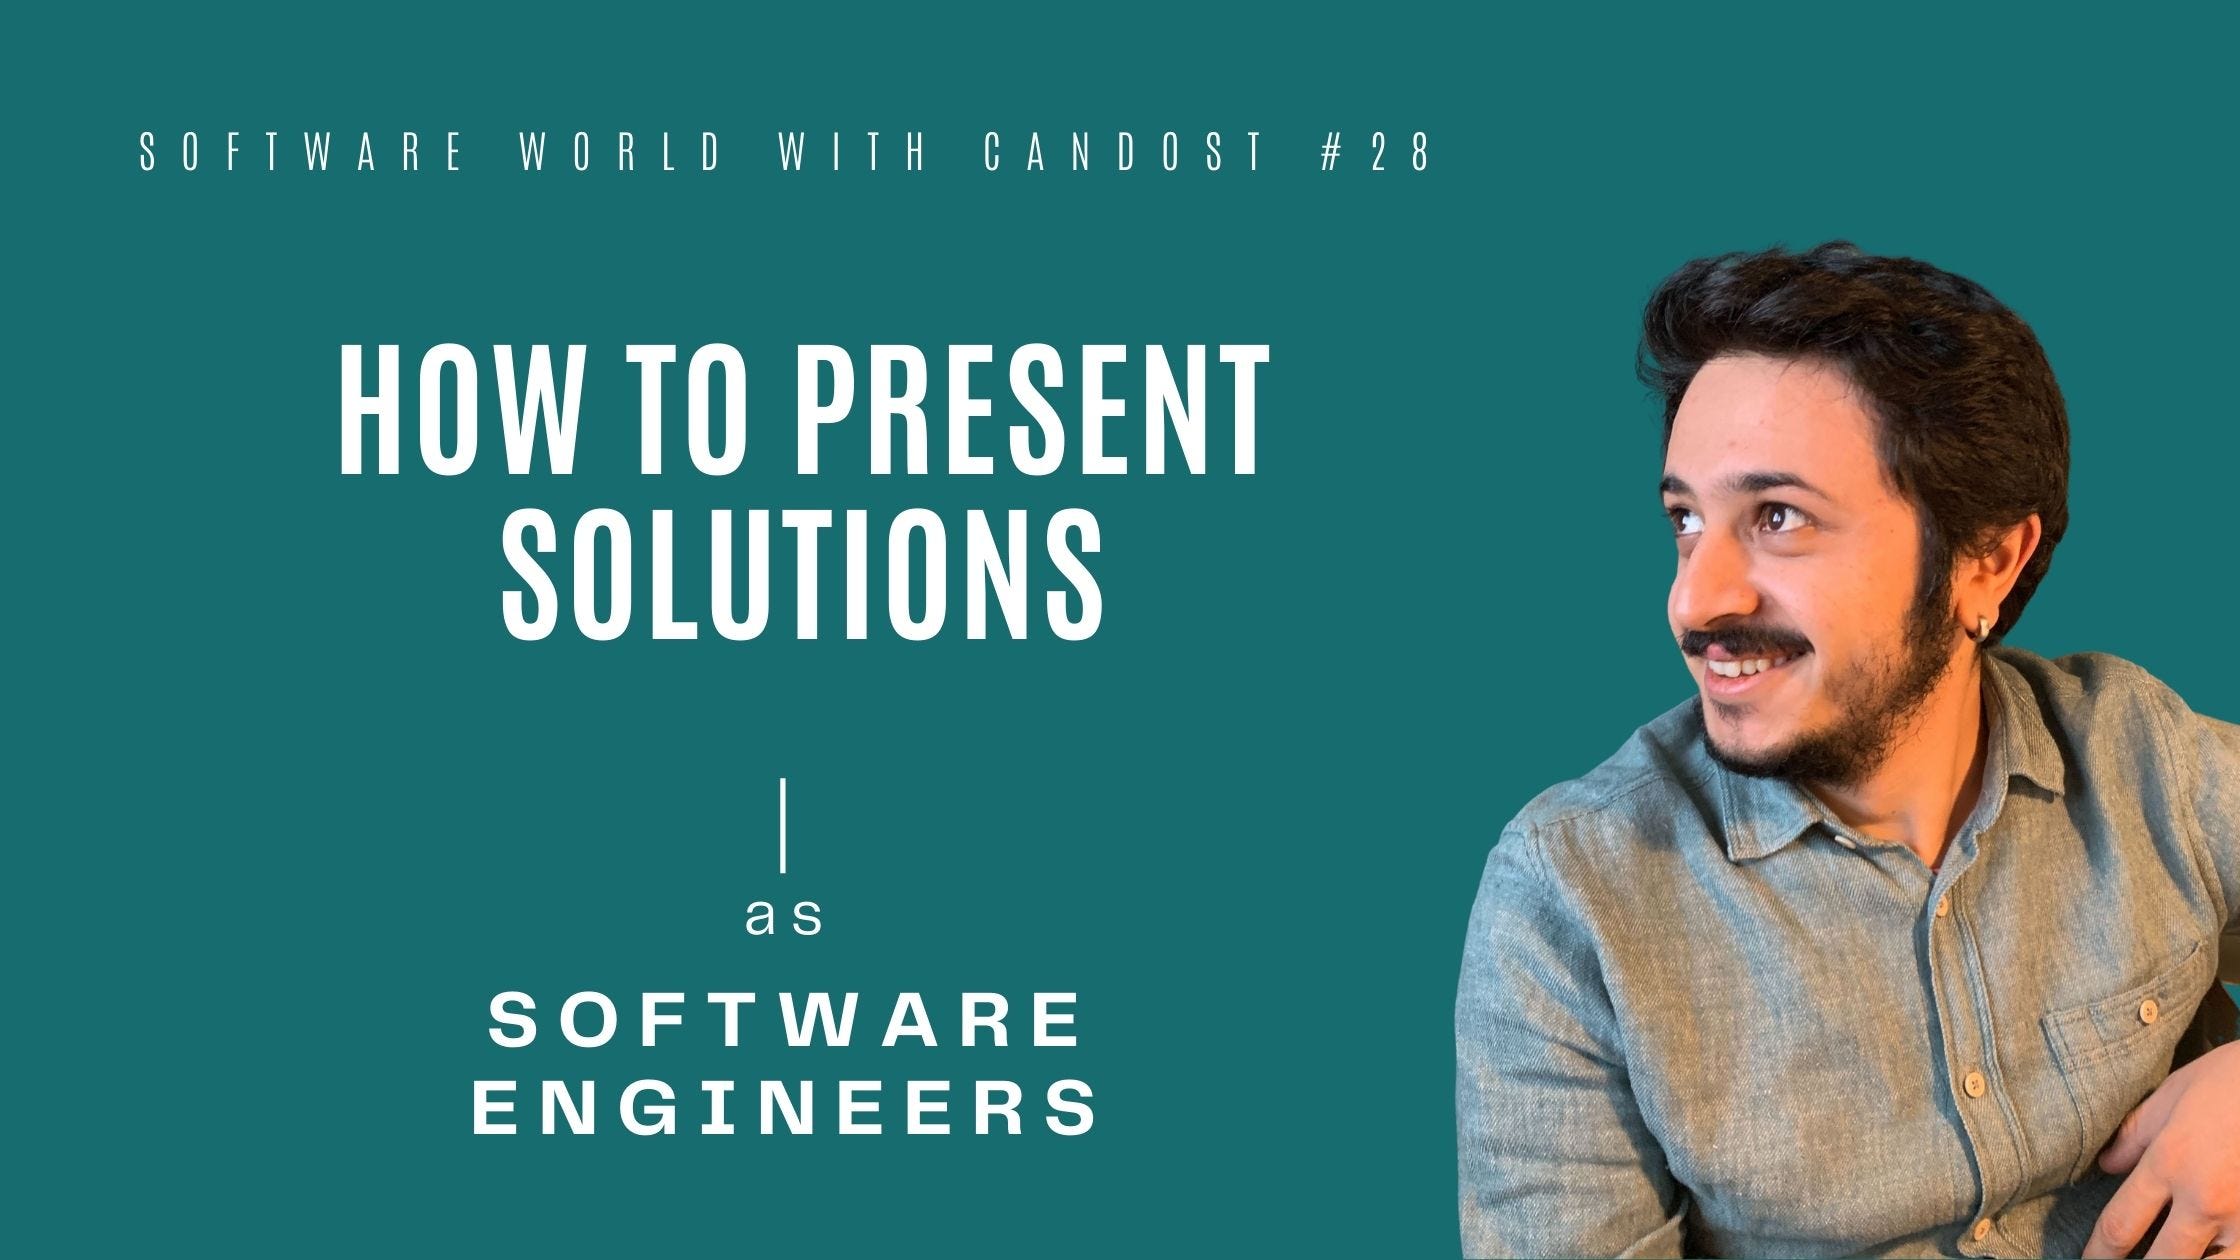 #28: How to Present Solutions as Software Engineers